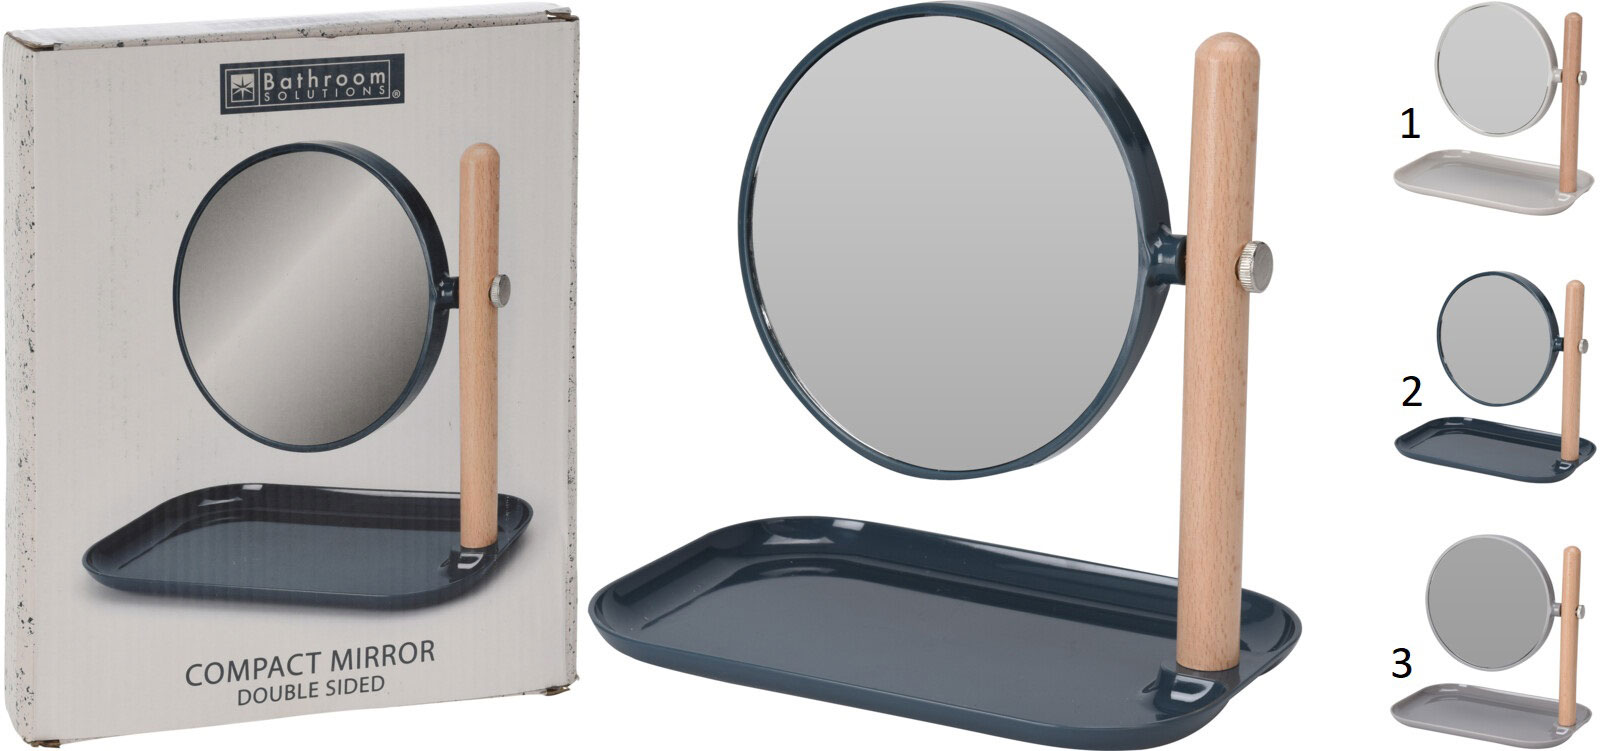 MAKE UP MIRROR ON STAND 3 ASSORTED COLORS